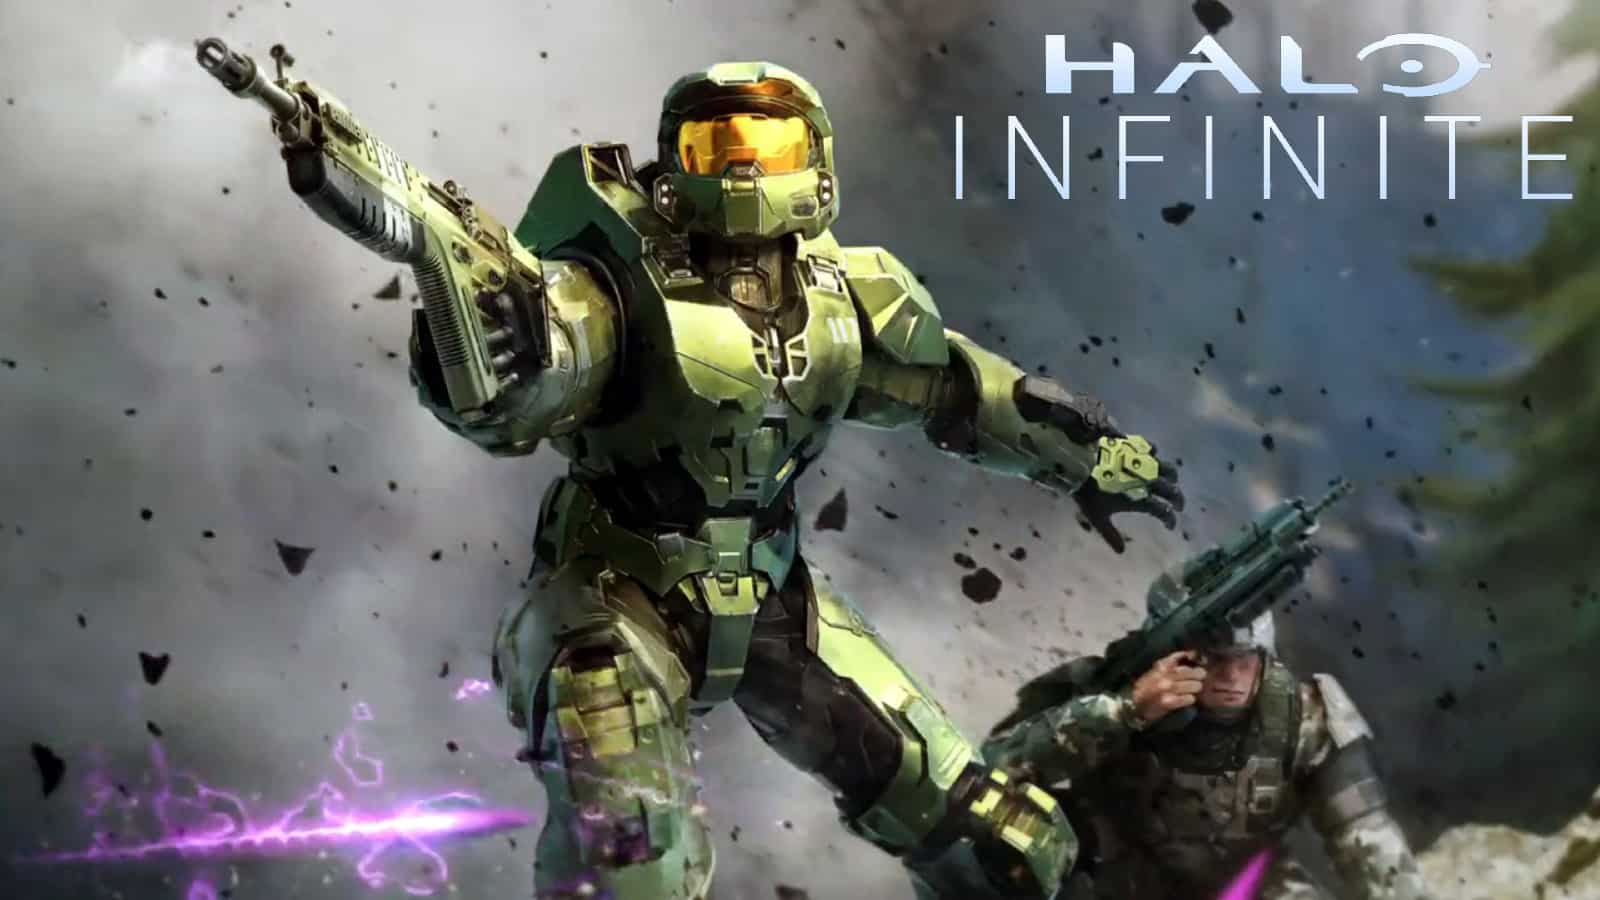 Halo Infinite's Master Chief leads the way against the Banished in Halo Infinite screenshot